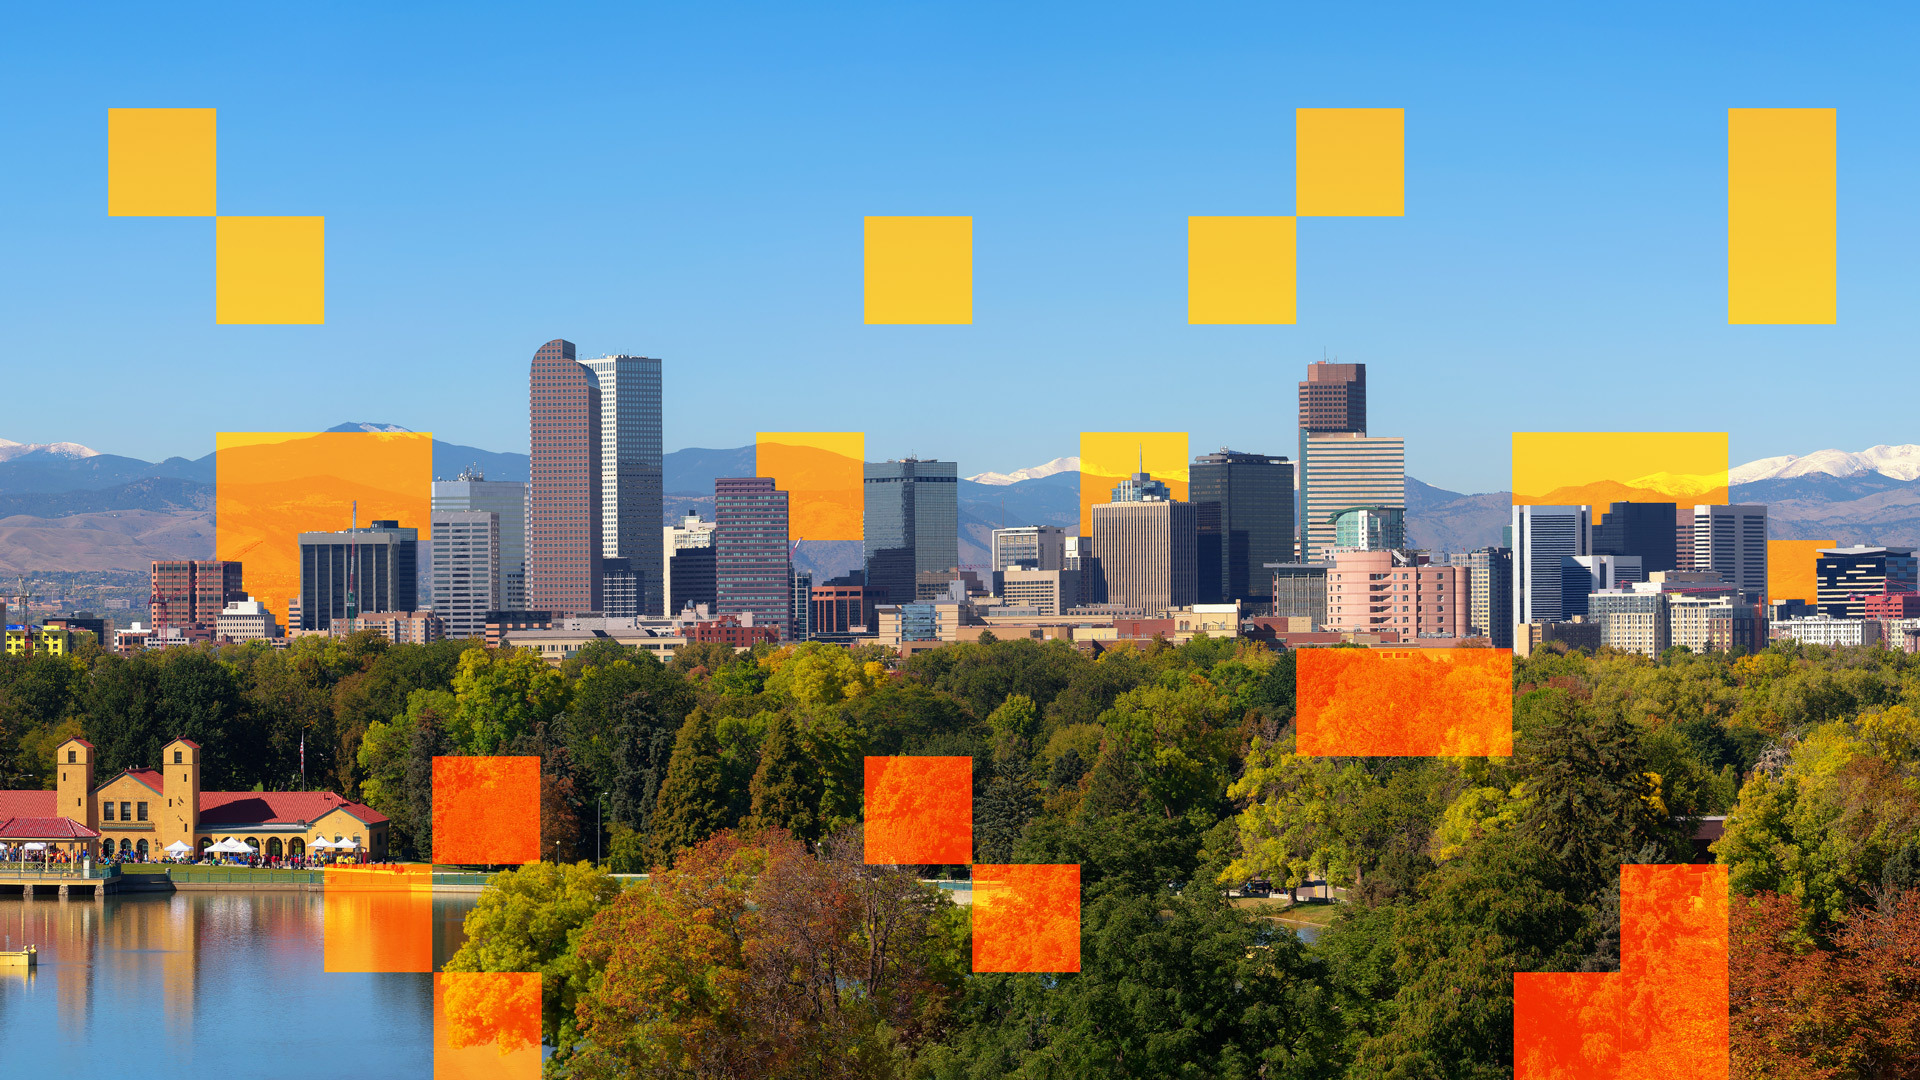 Landscape photo of the Denver skyline with orange squares collaged over the top